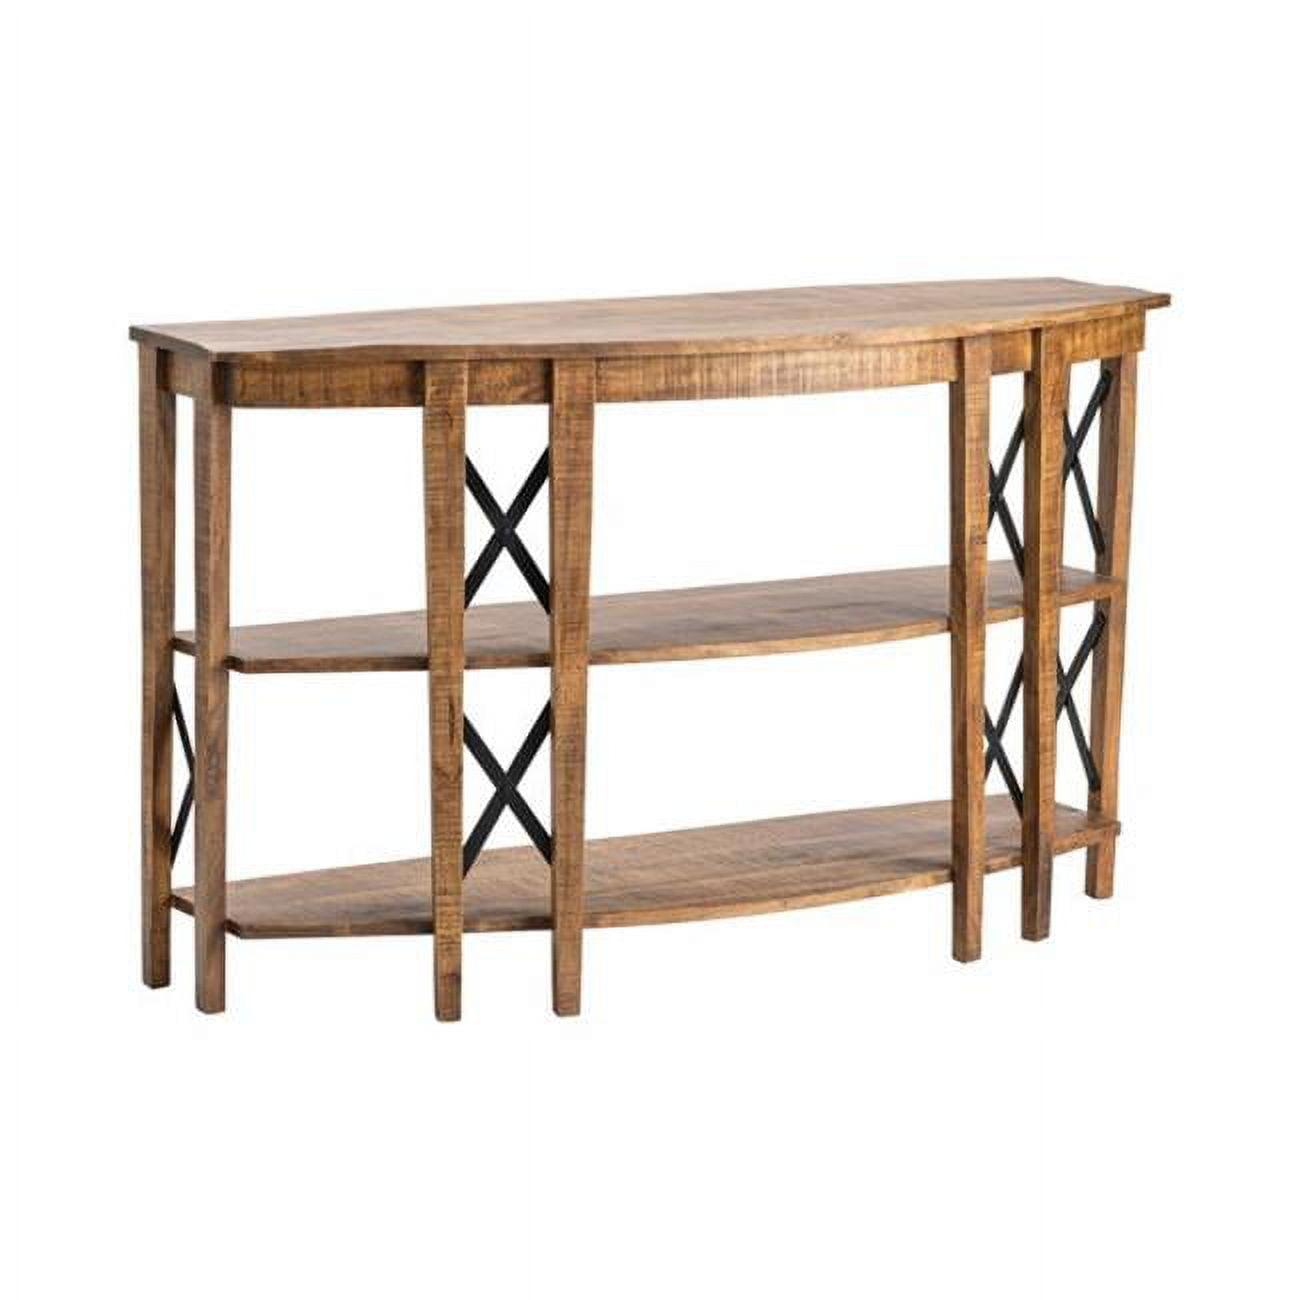 Sutton Creek Rustic Demilune Console Table with Cross Bar Support